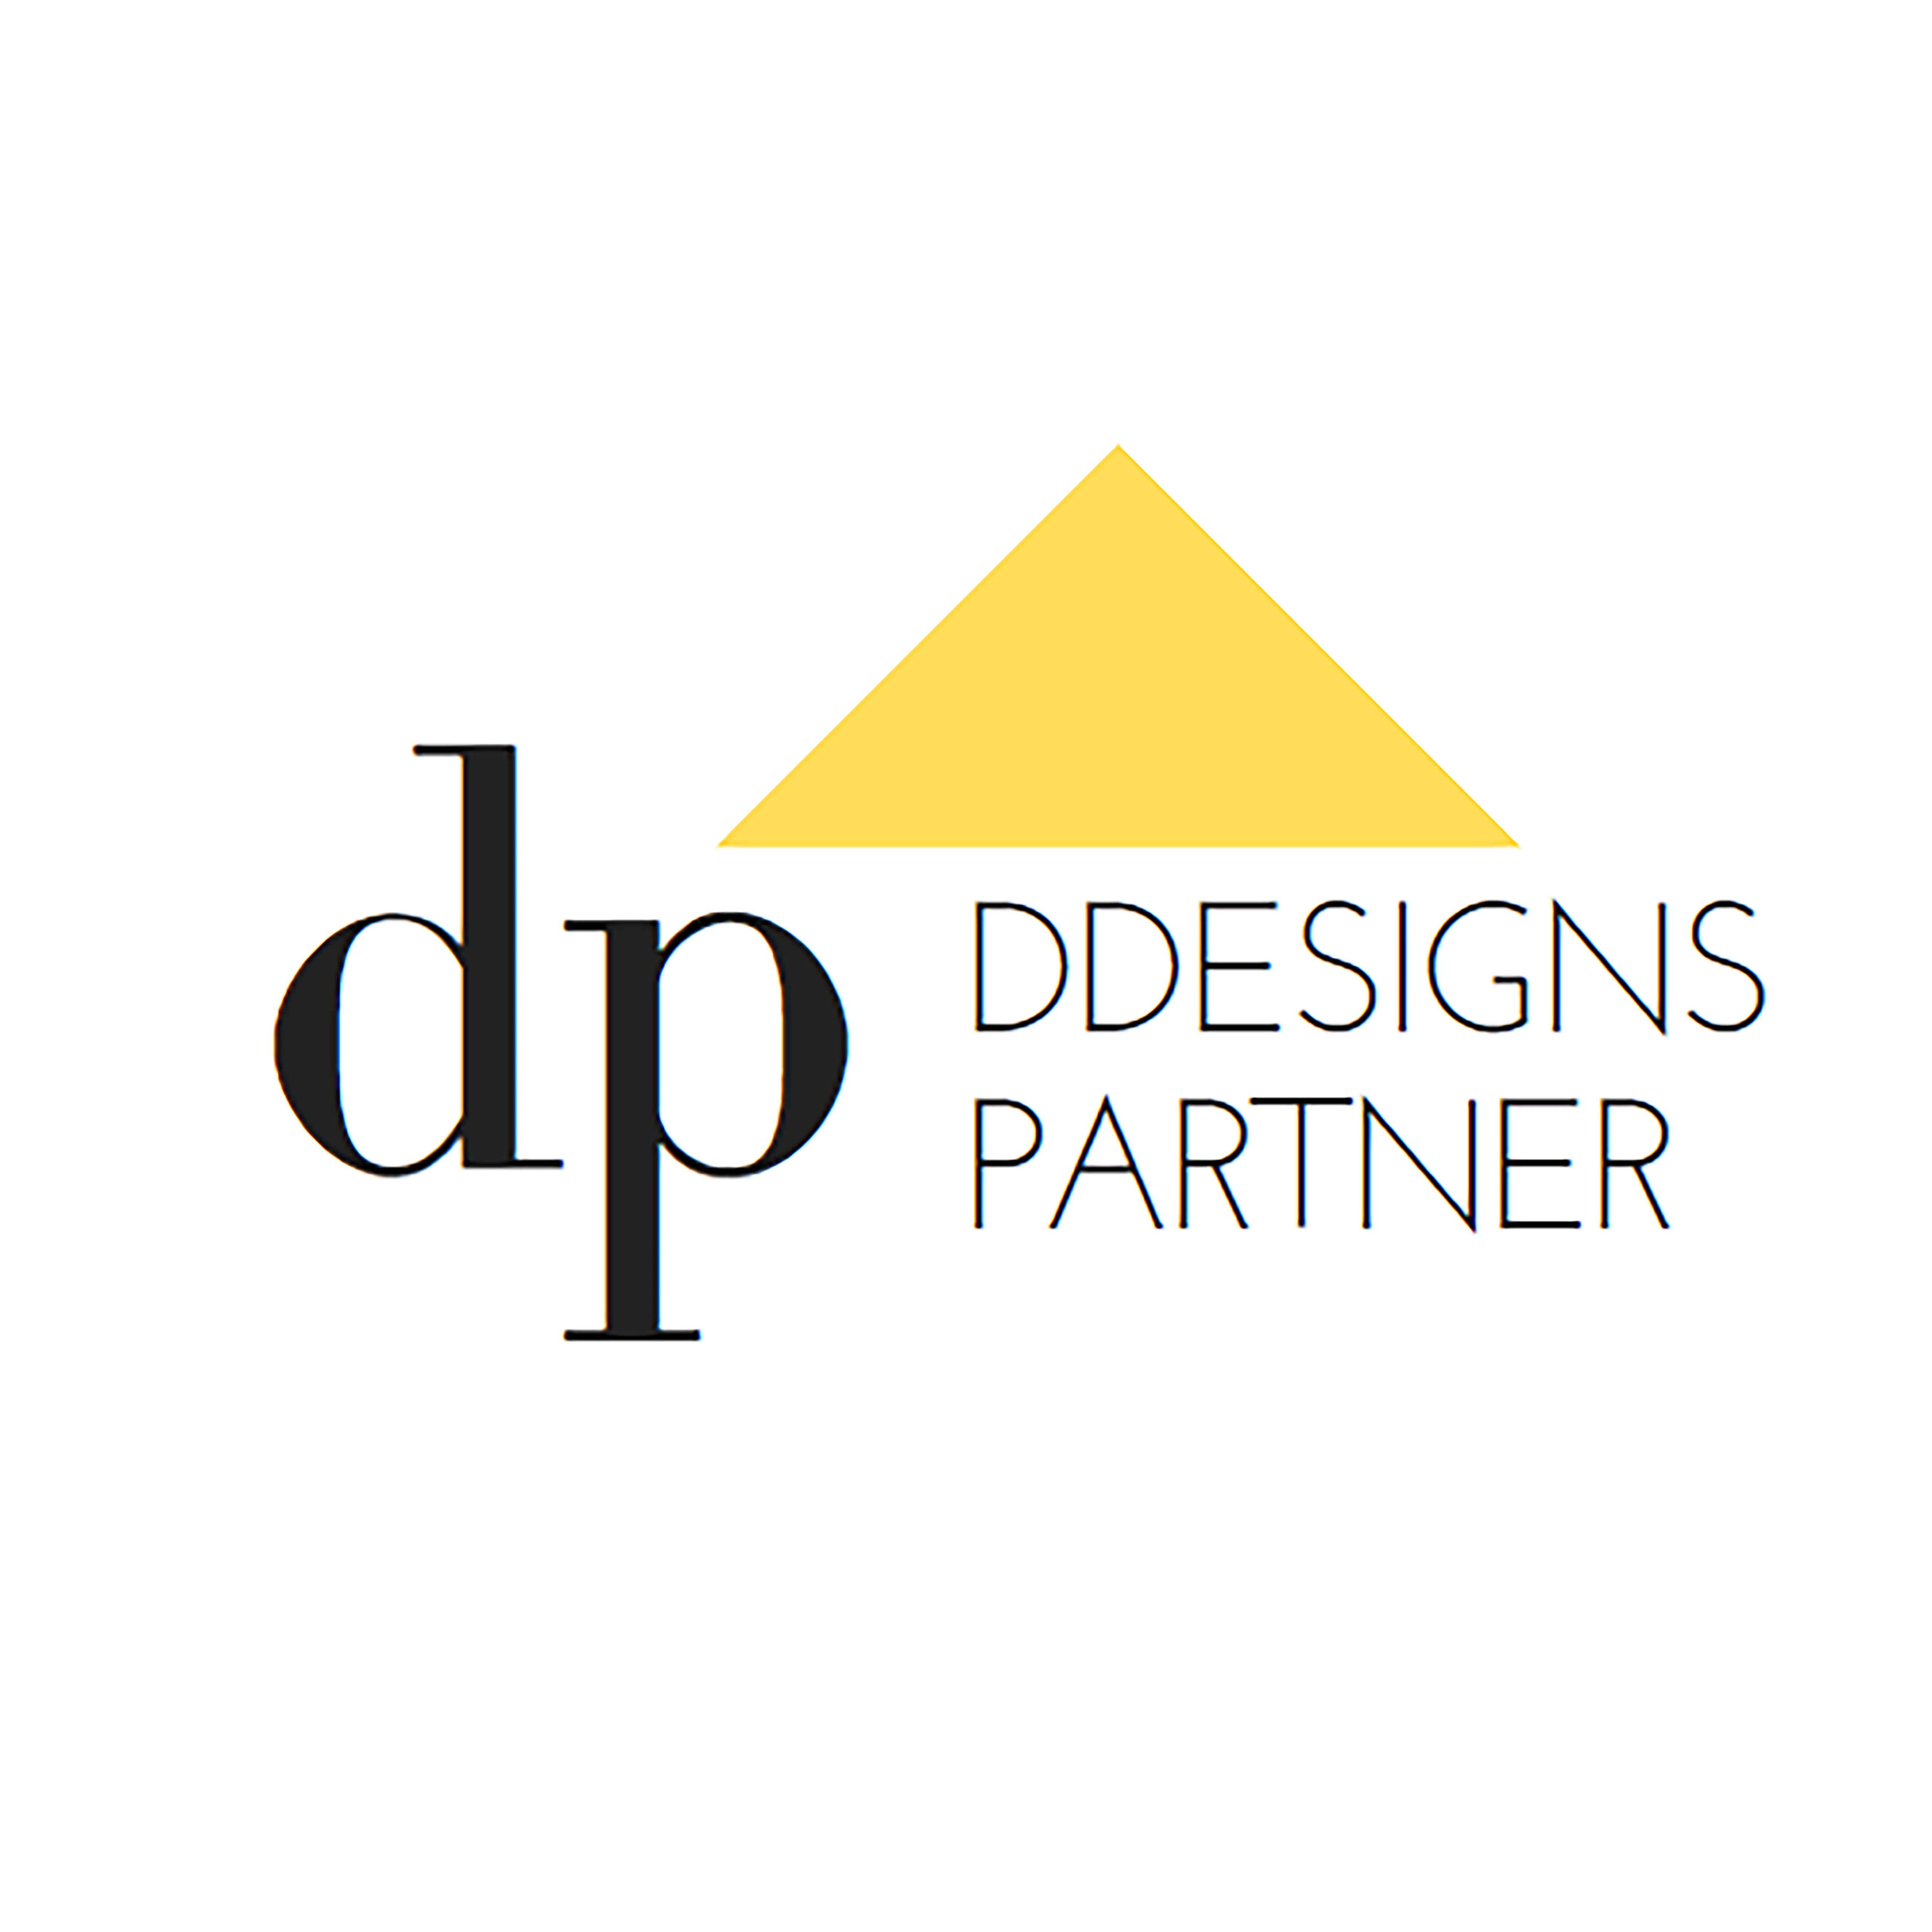 DDESIGNS PARTNER|Accounting Services|Professional Services